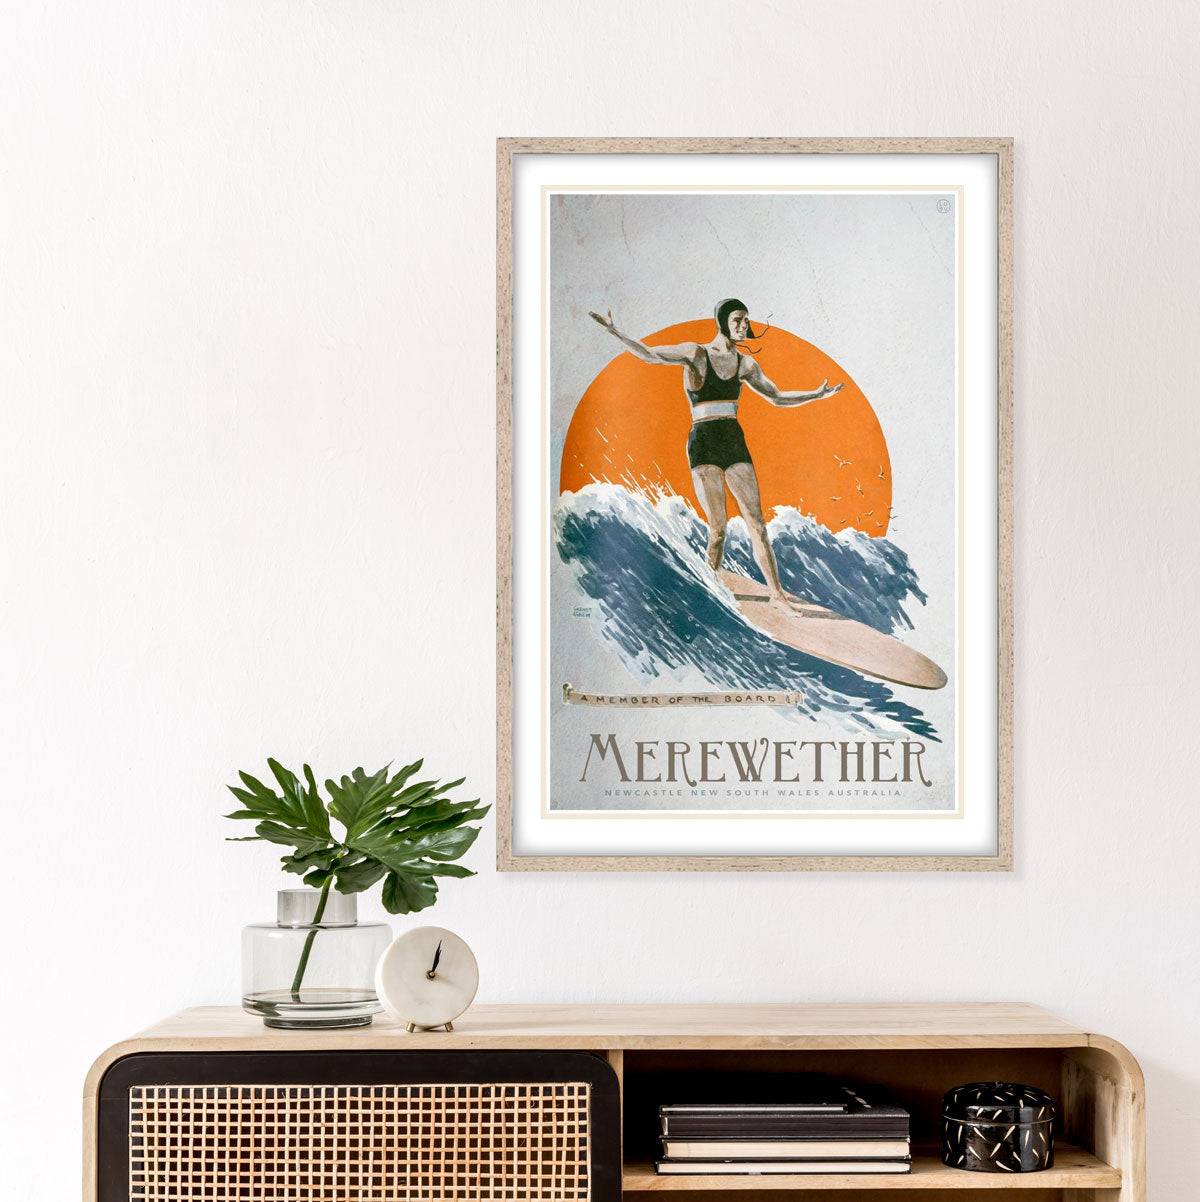 Merewether retro vintage surfer poster from Places We Luv